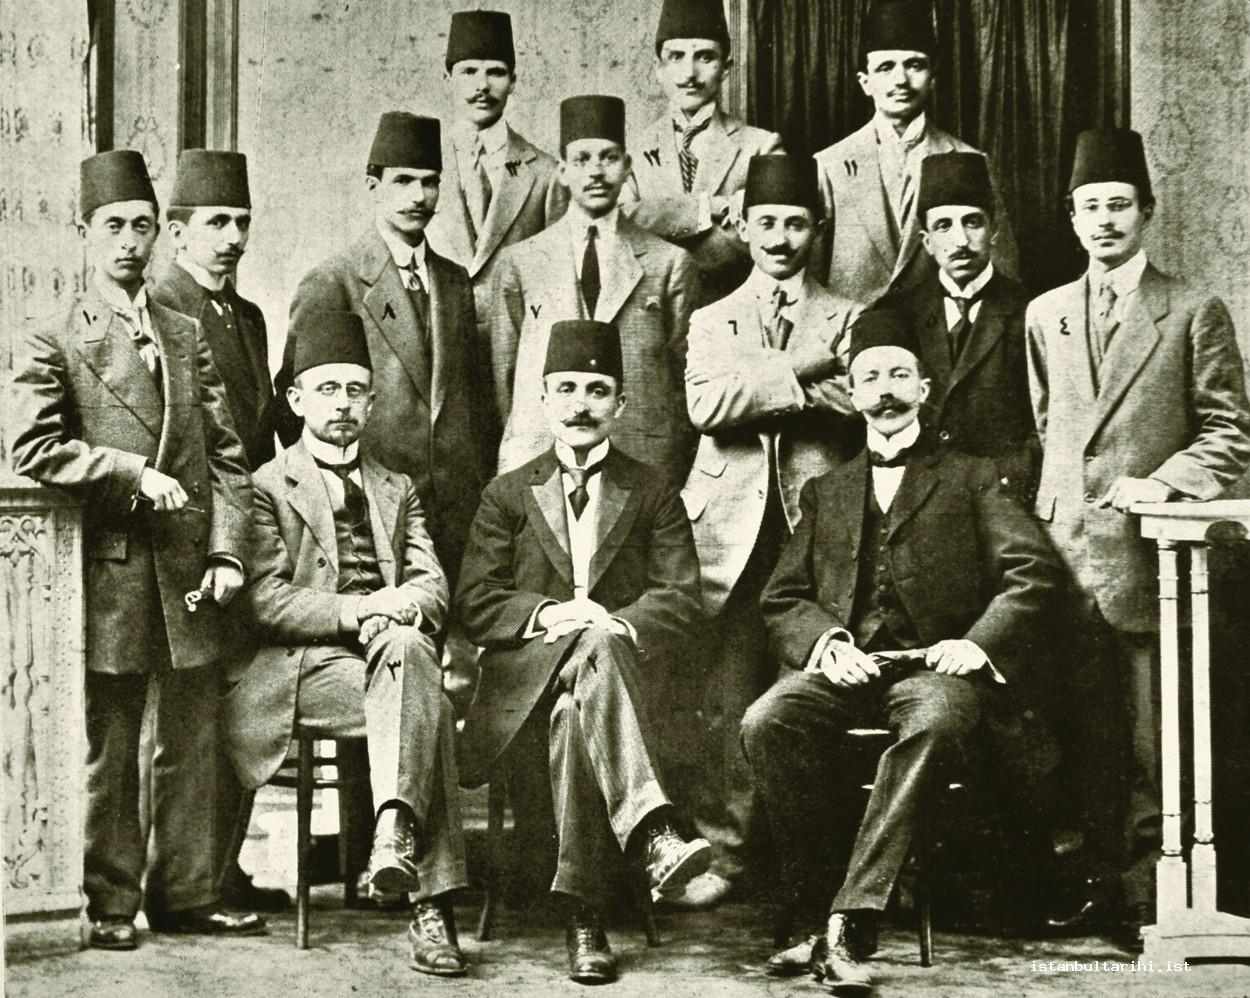 4- The 1911 graduates and some of the teachers of the Engineering School (Şehbal). The front row from right to left, from front to back: “1. Belgian Professor Mr. Dikman, 2. School Principal Refik Bey, 3. Electrical engineer Belgian Professor Mihi? 4. Galip, 5. Vahid, 6. Mehmed, 7. Kemal, 8. Abdullah, 9. Cemal, 10. Hasan, 11. Haydar, 12. Hacı Mehmed, 13. Mustafa Şevket Efendiler.”